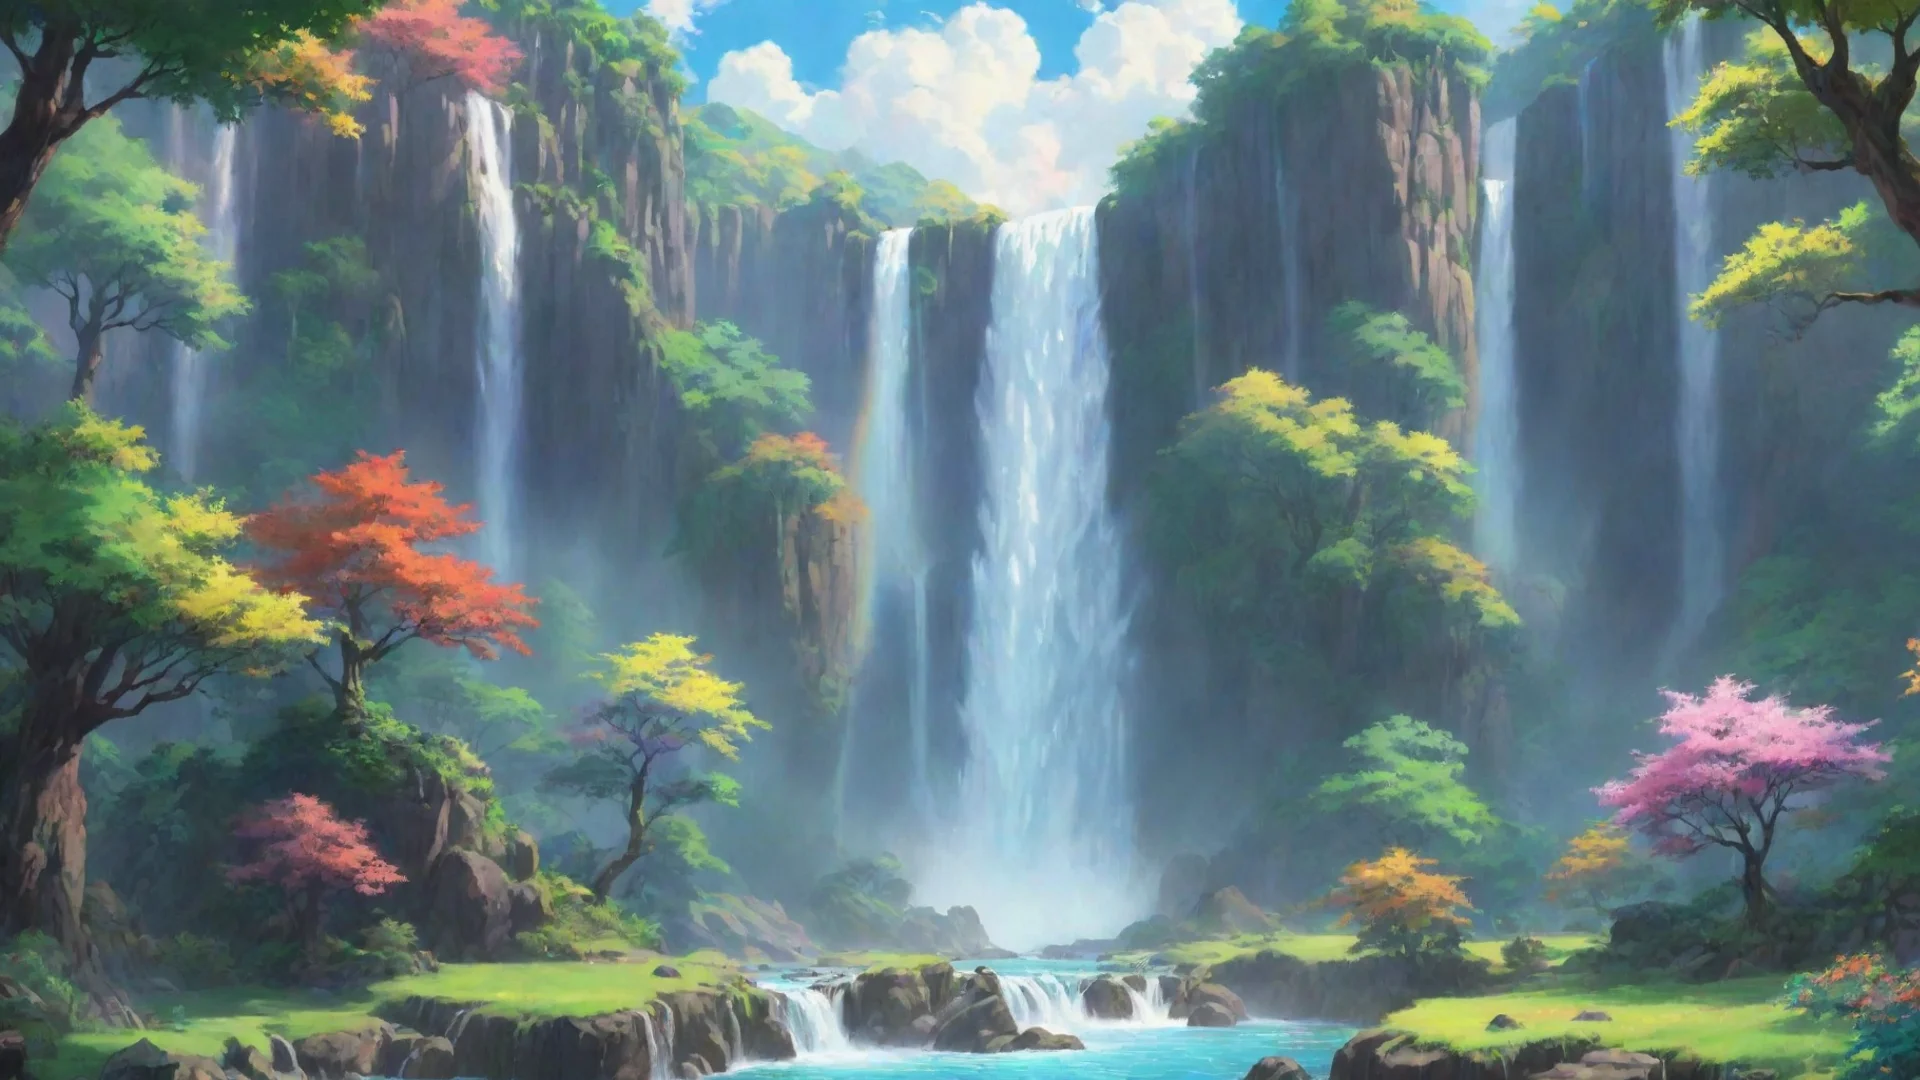 amazing lowfi relaxing calming on colorful chilling relaxing with lush wonderful environment waterfalls rainbows hd ghibli fantasy fantastic awesome portrait 2 wide